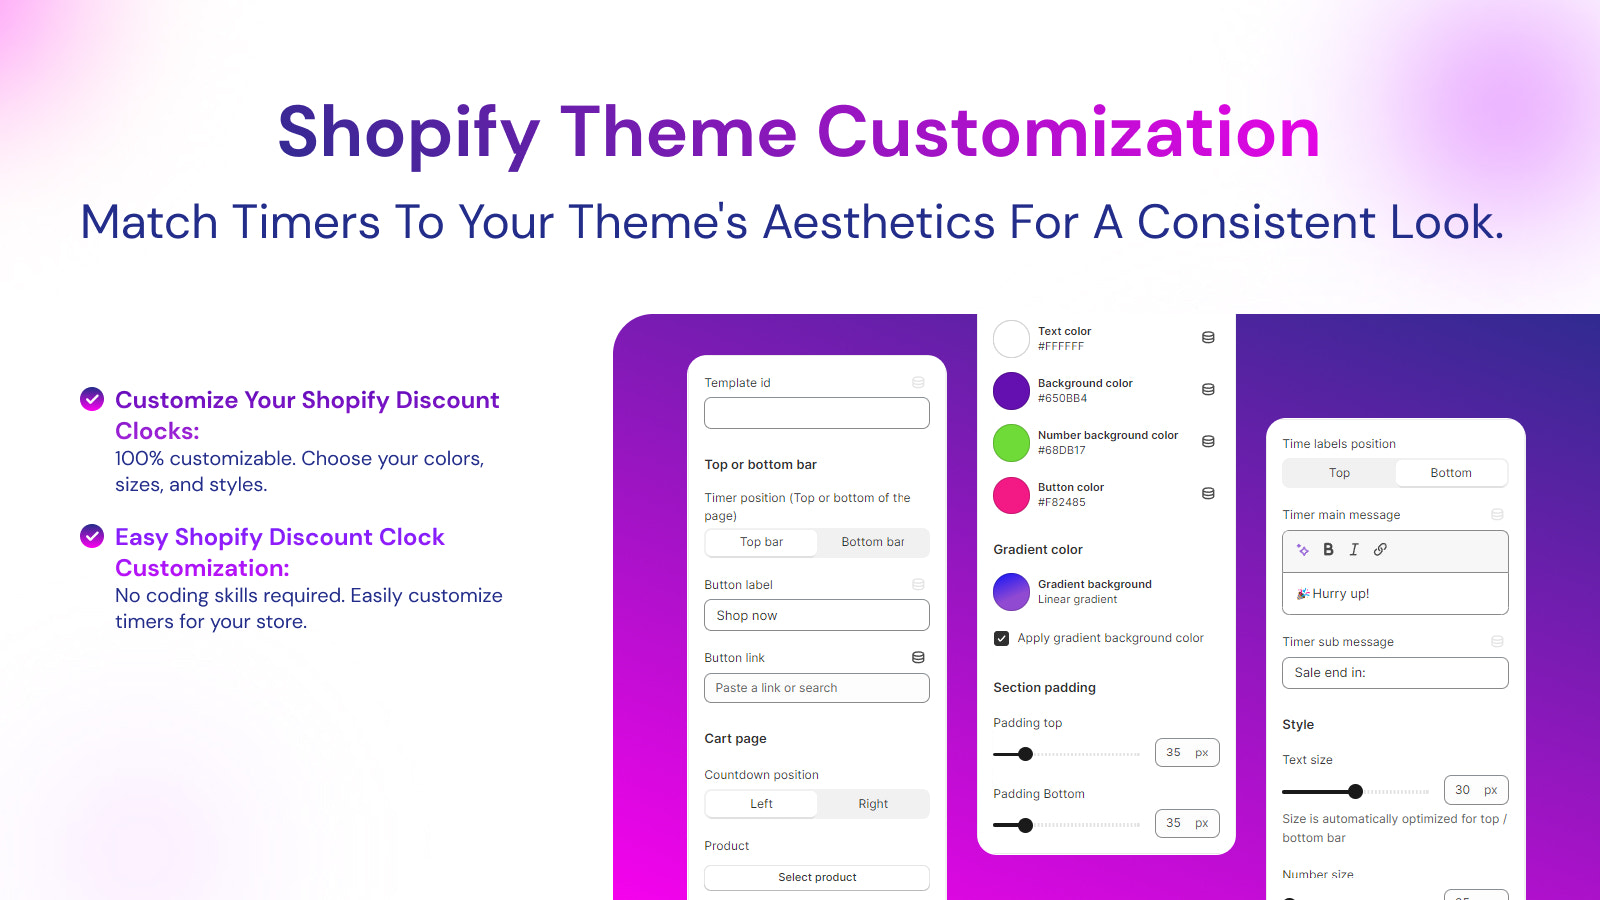 Customized Options Inside the Shopify Theme Editor